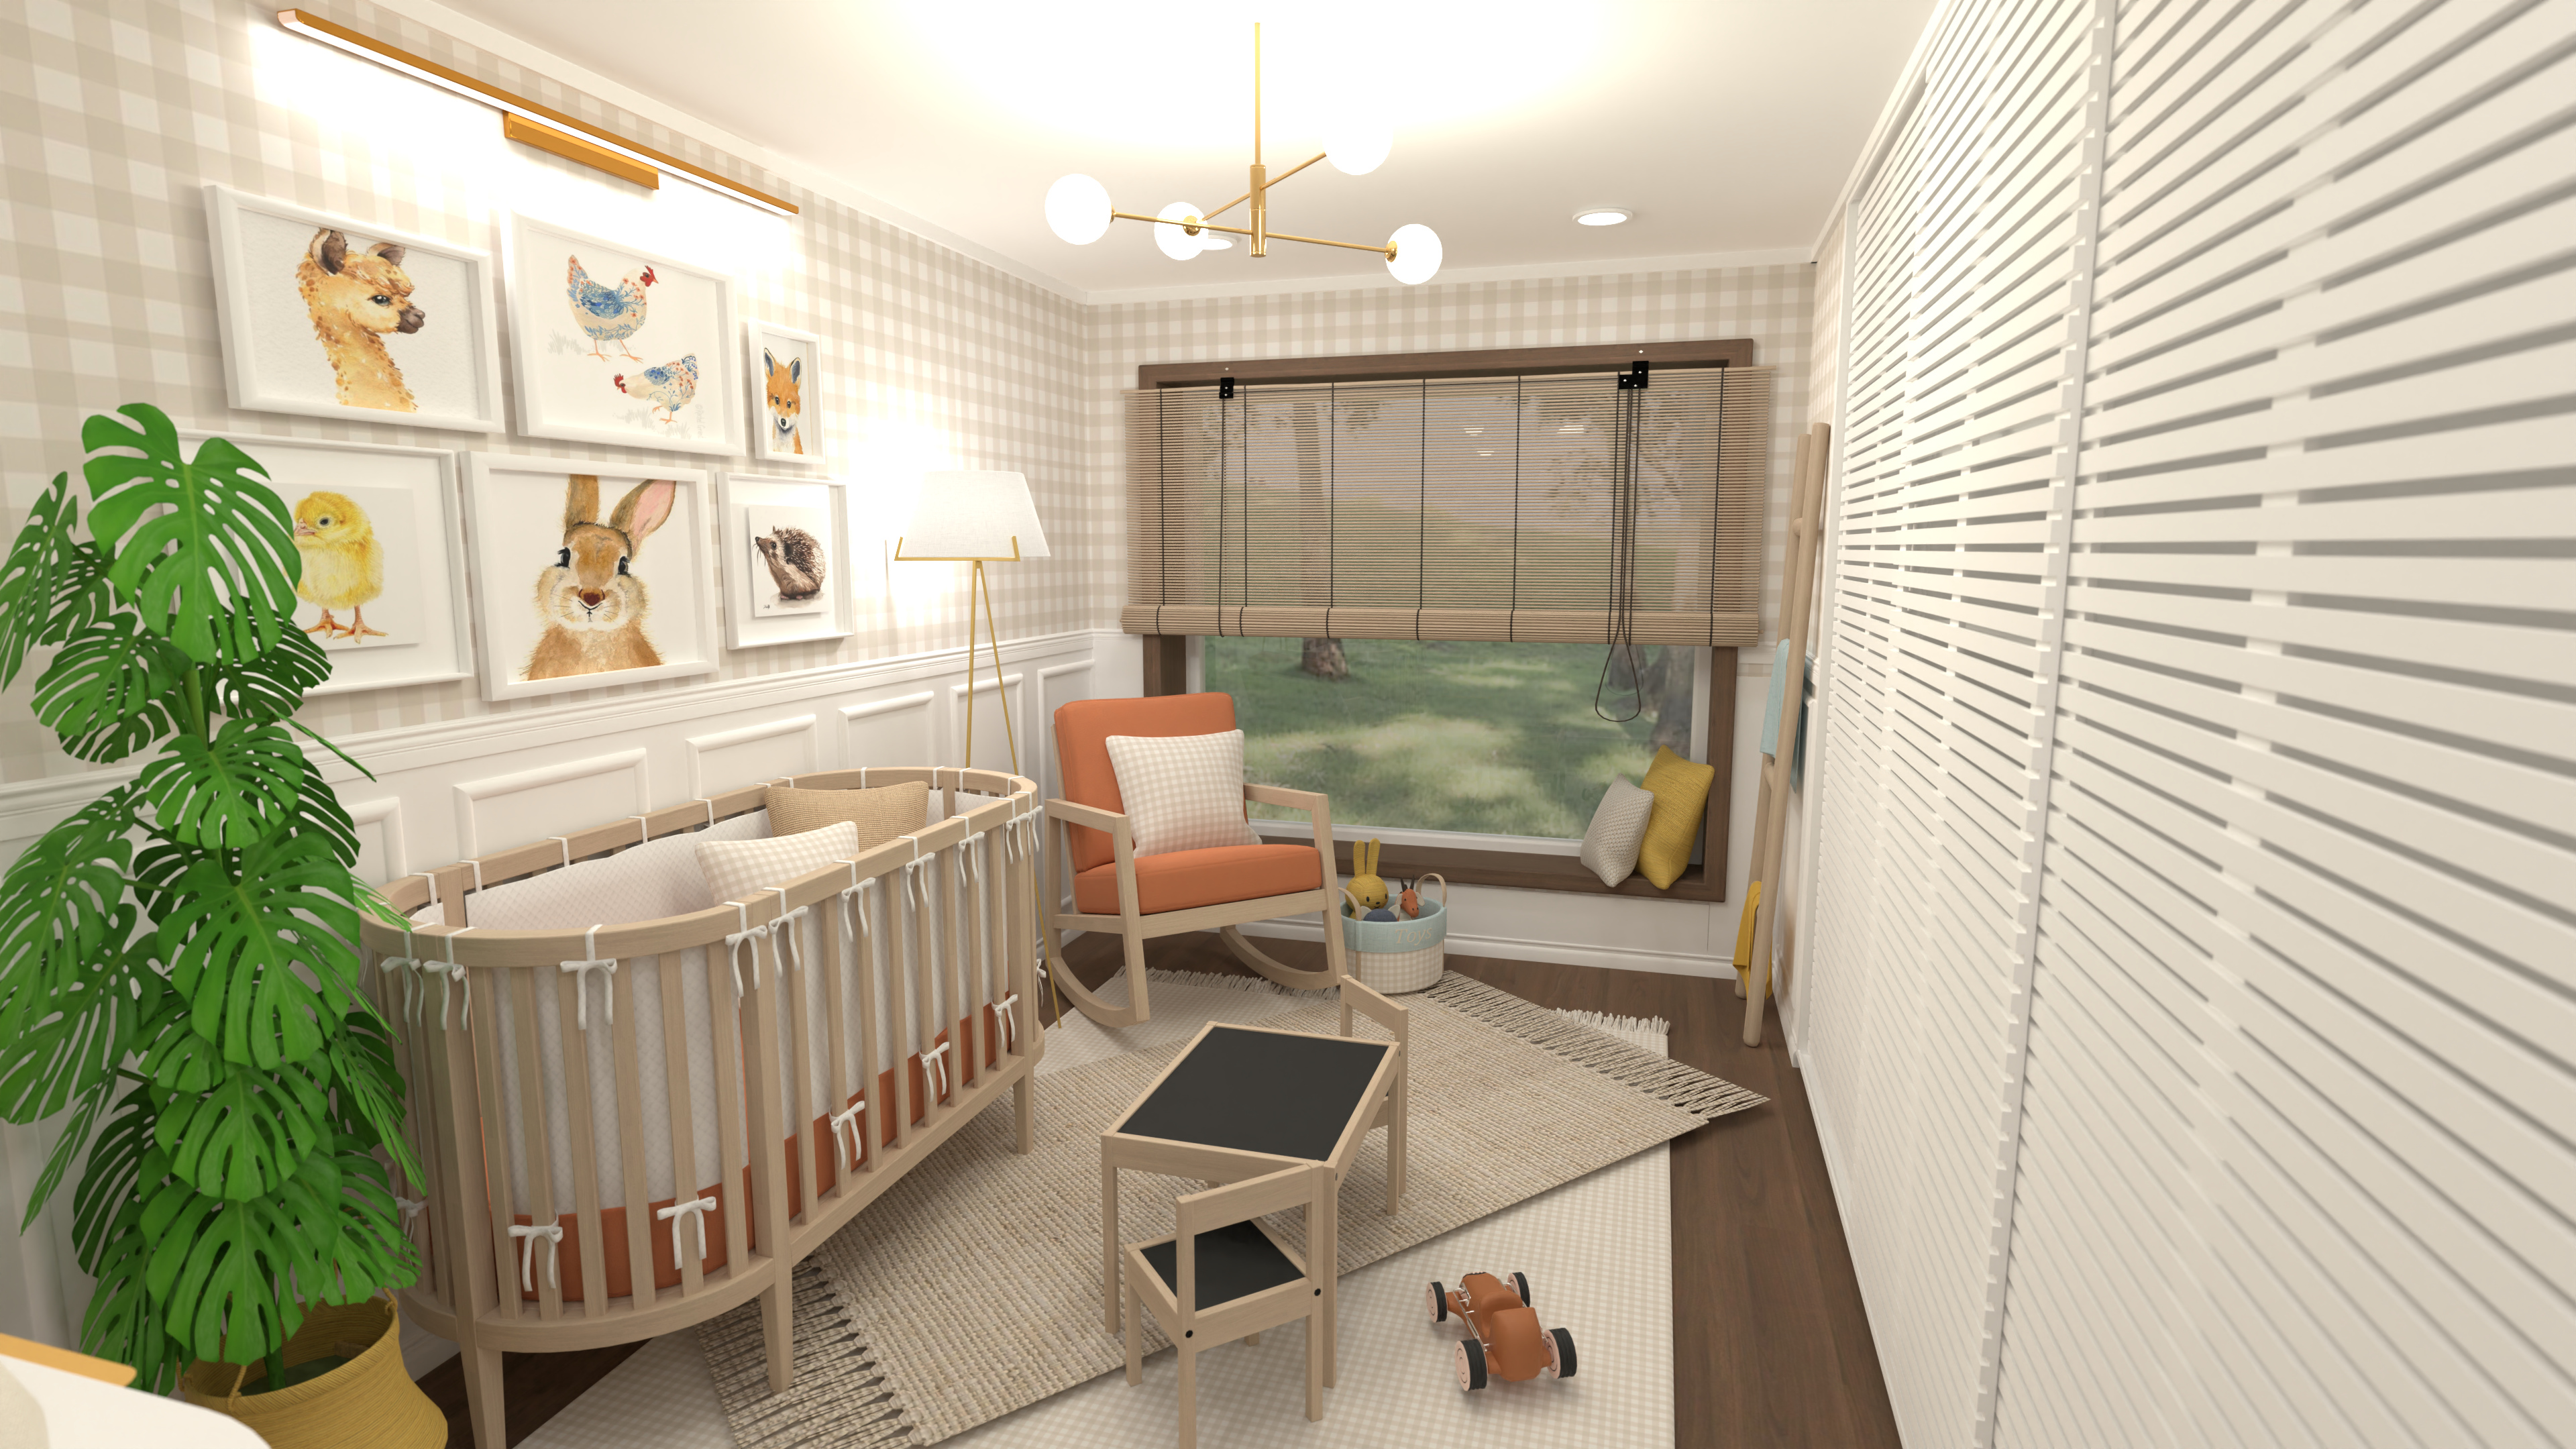 NURSERY 20853574 by LifeDesignAndCo image